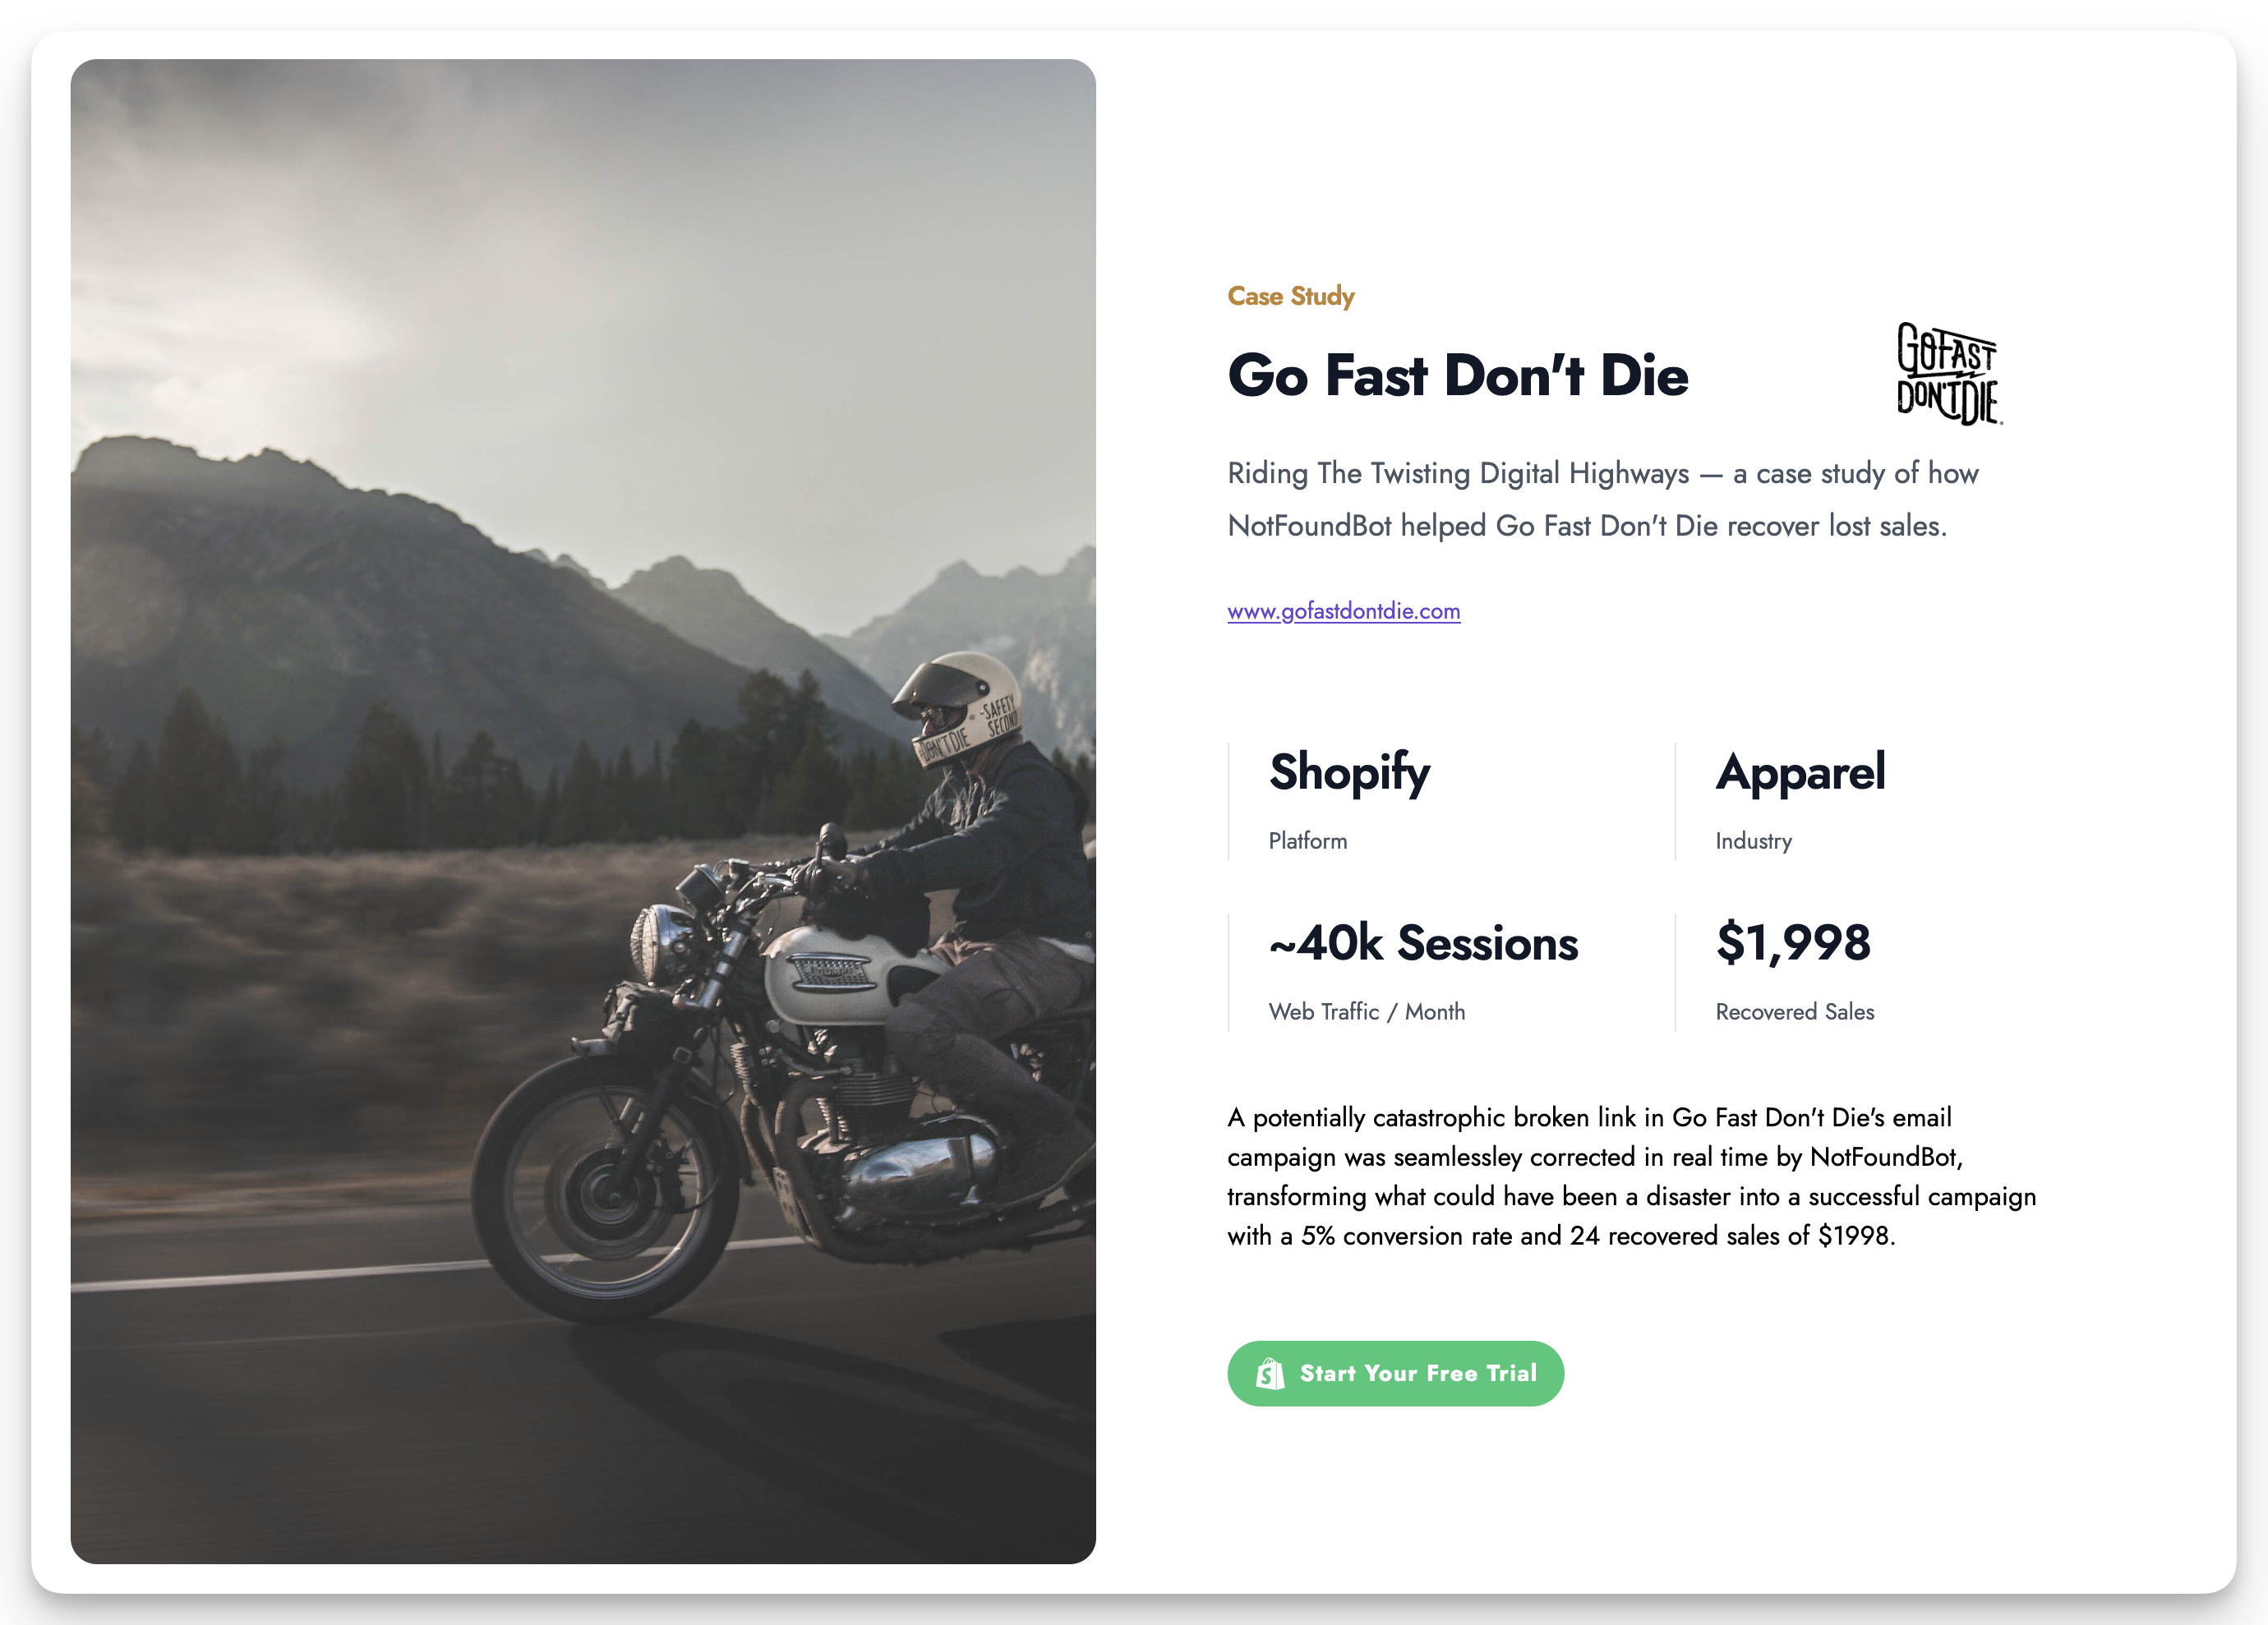 Go Fast Don't Die case study image.